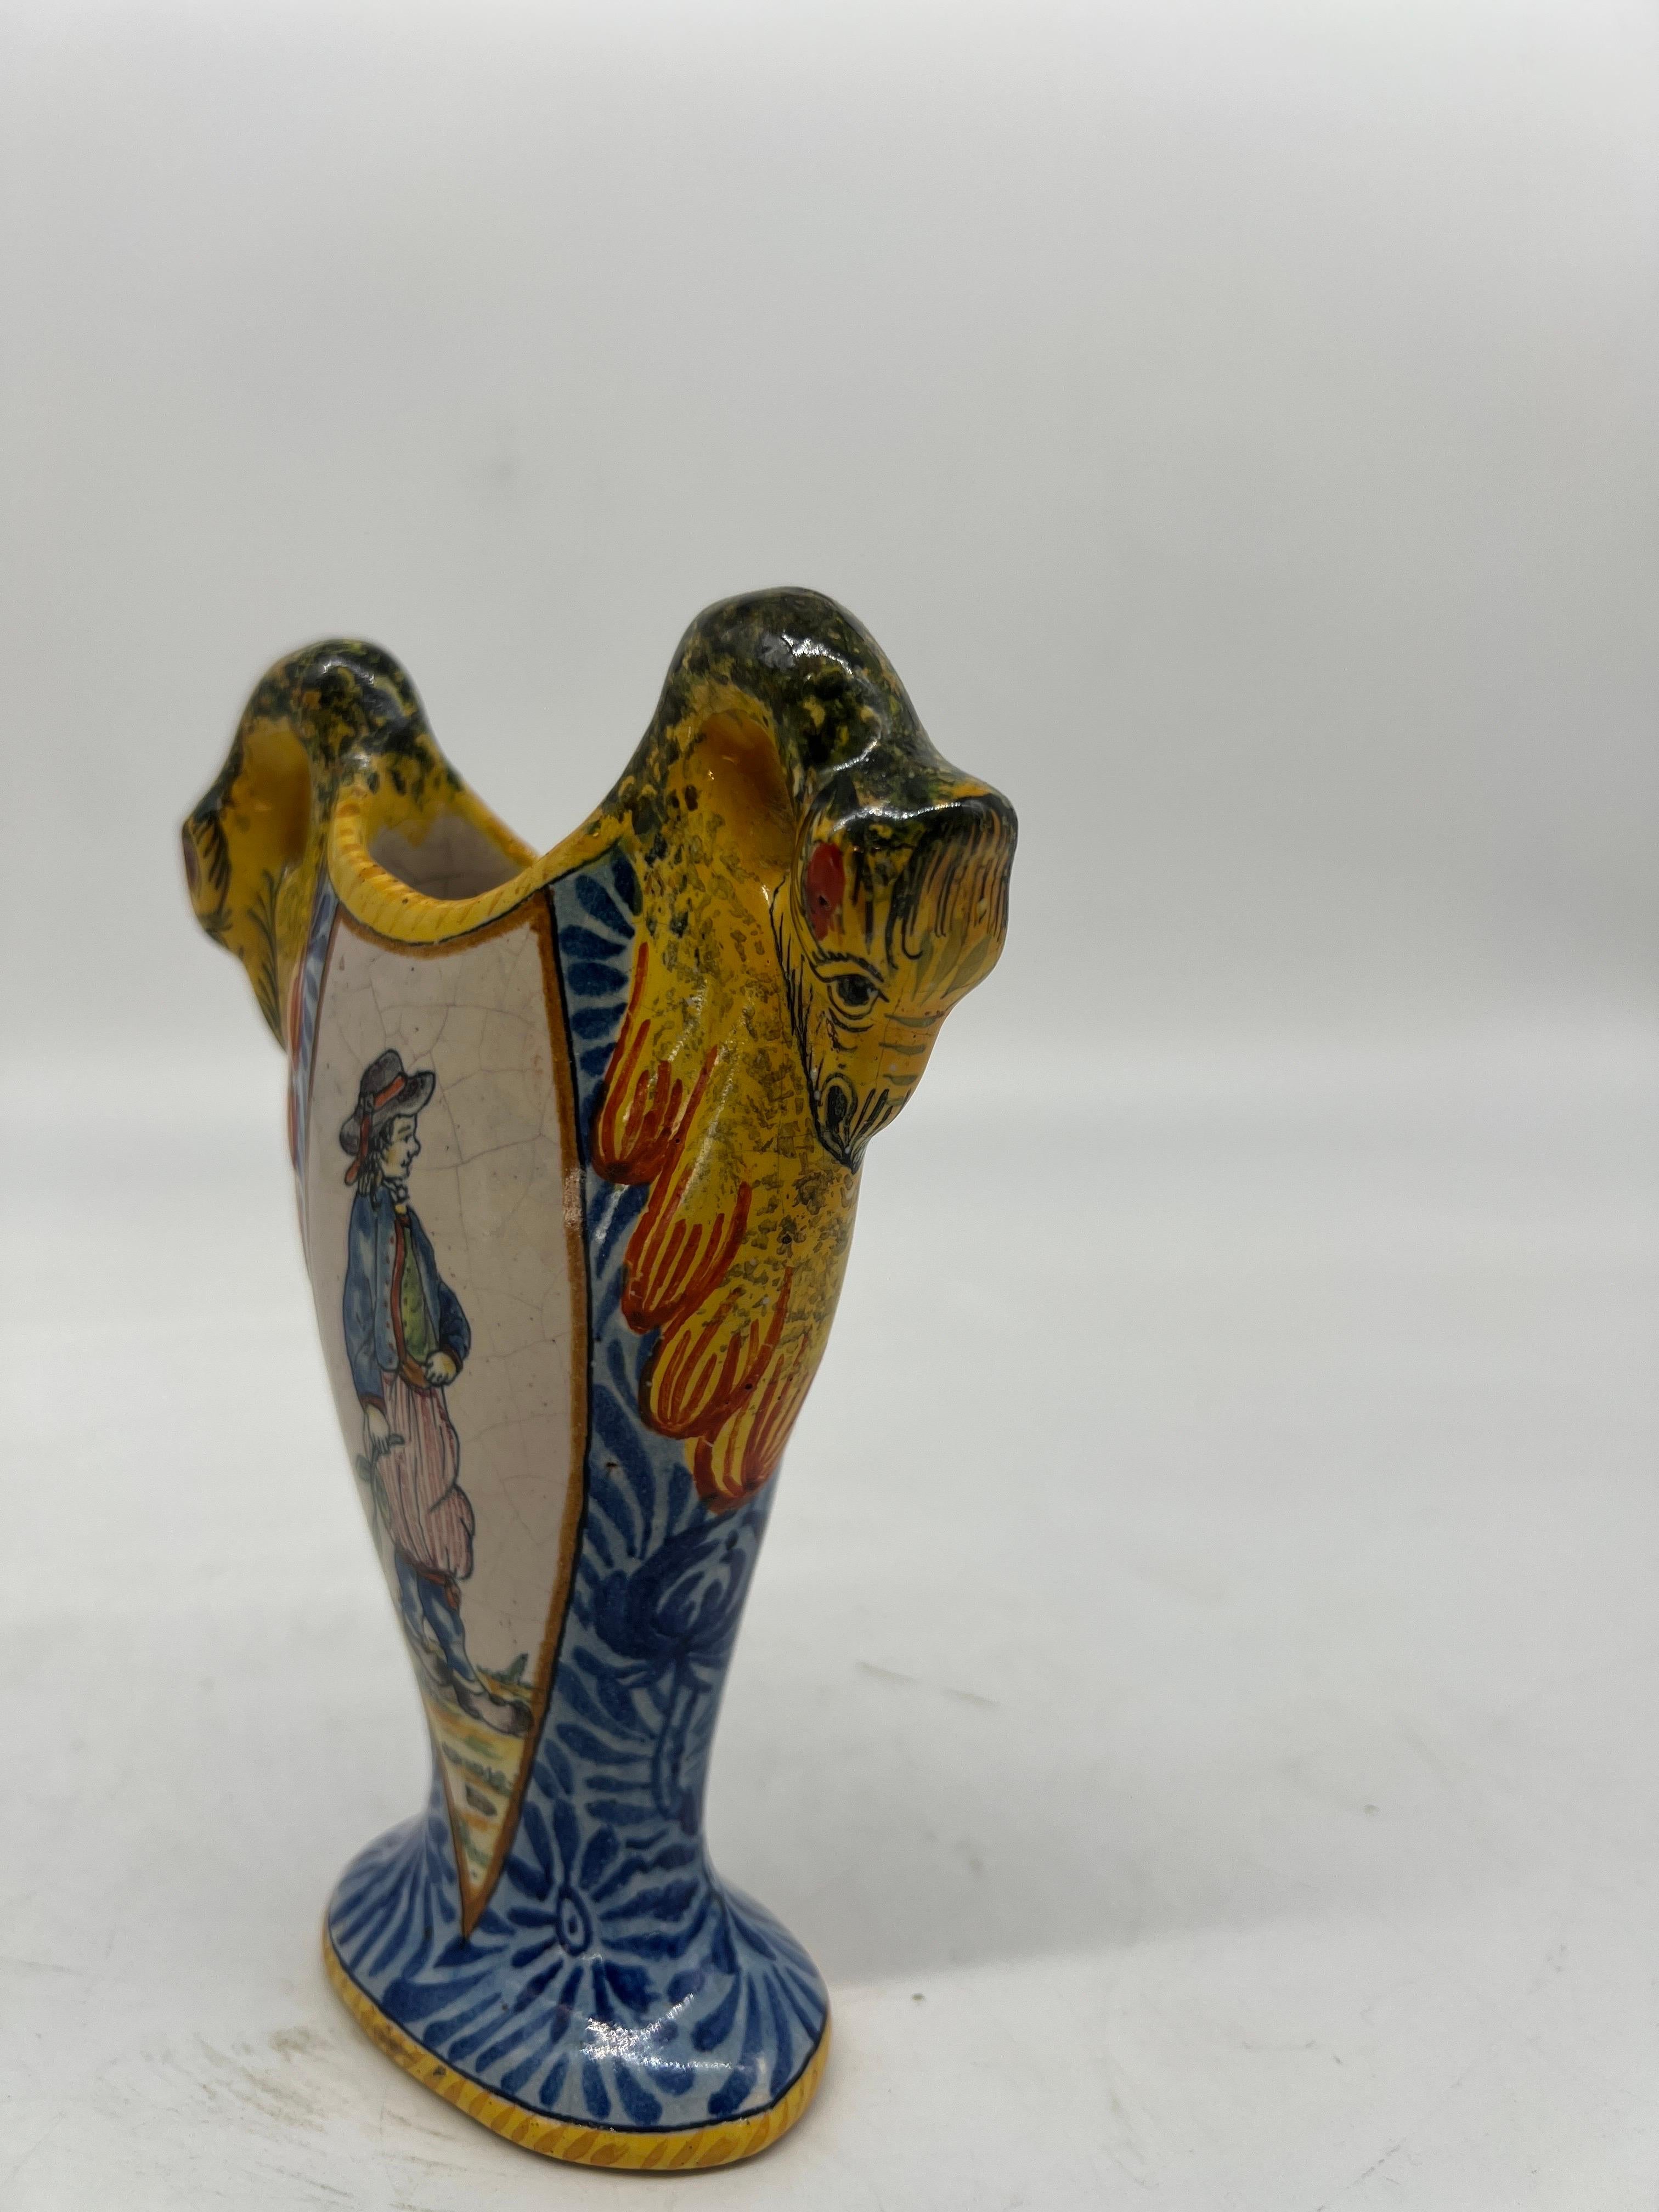 The 19th Century French Hand Painted Faience Porquier-Beau Quimper Swan Vase is a remarkable piece of ceramic art. Made in Quimper, France, by the renowned Porquier-Beau pottery, this vase showcases the distinctive style and craftsmanship that the